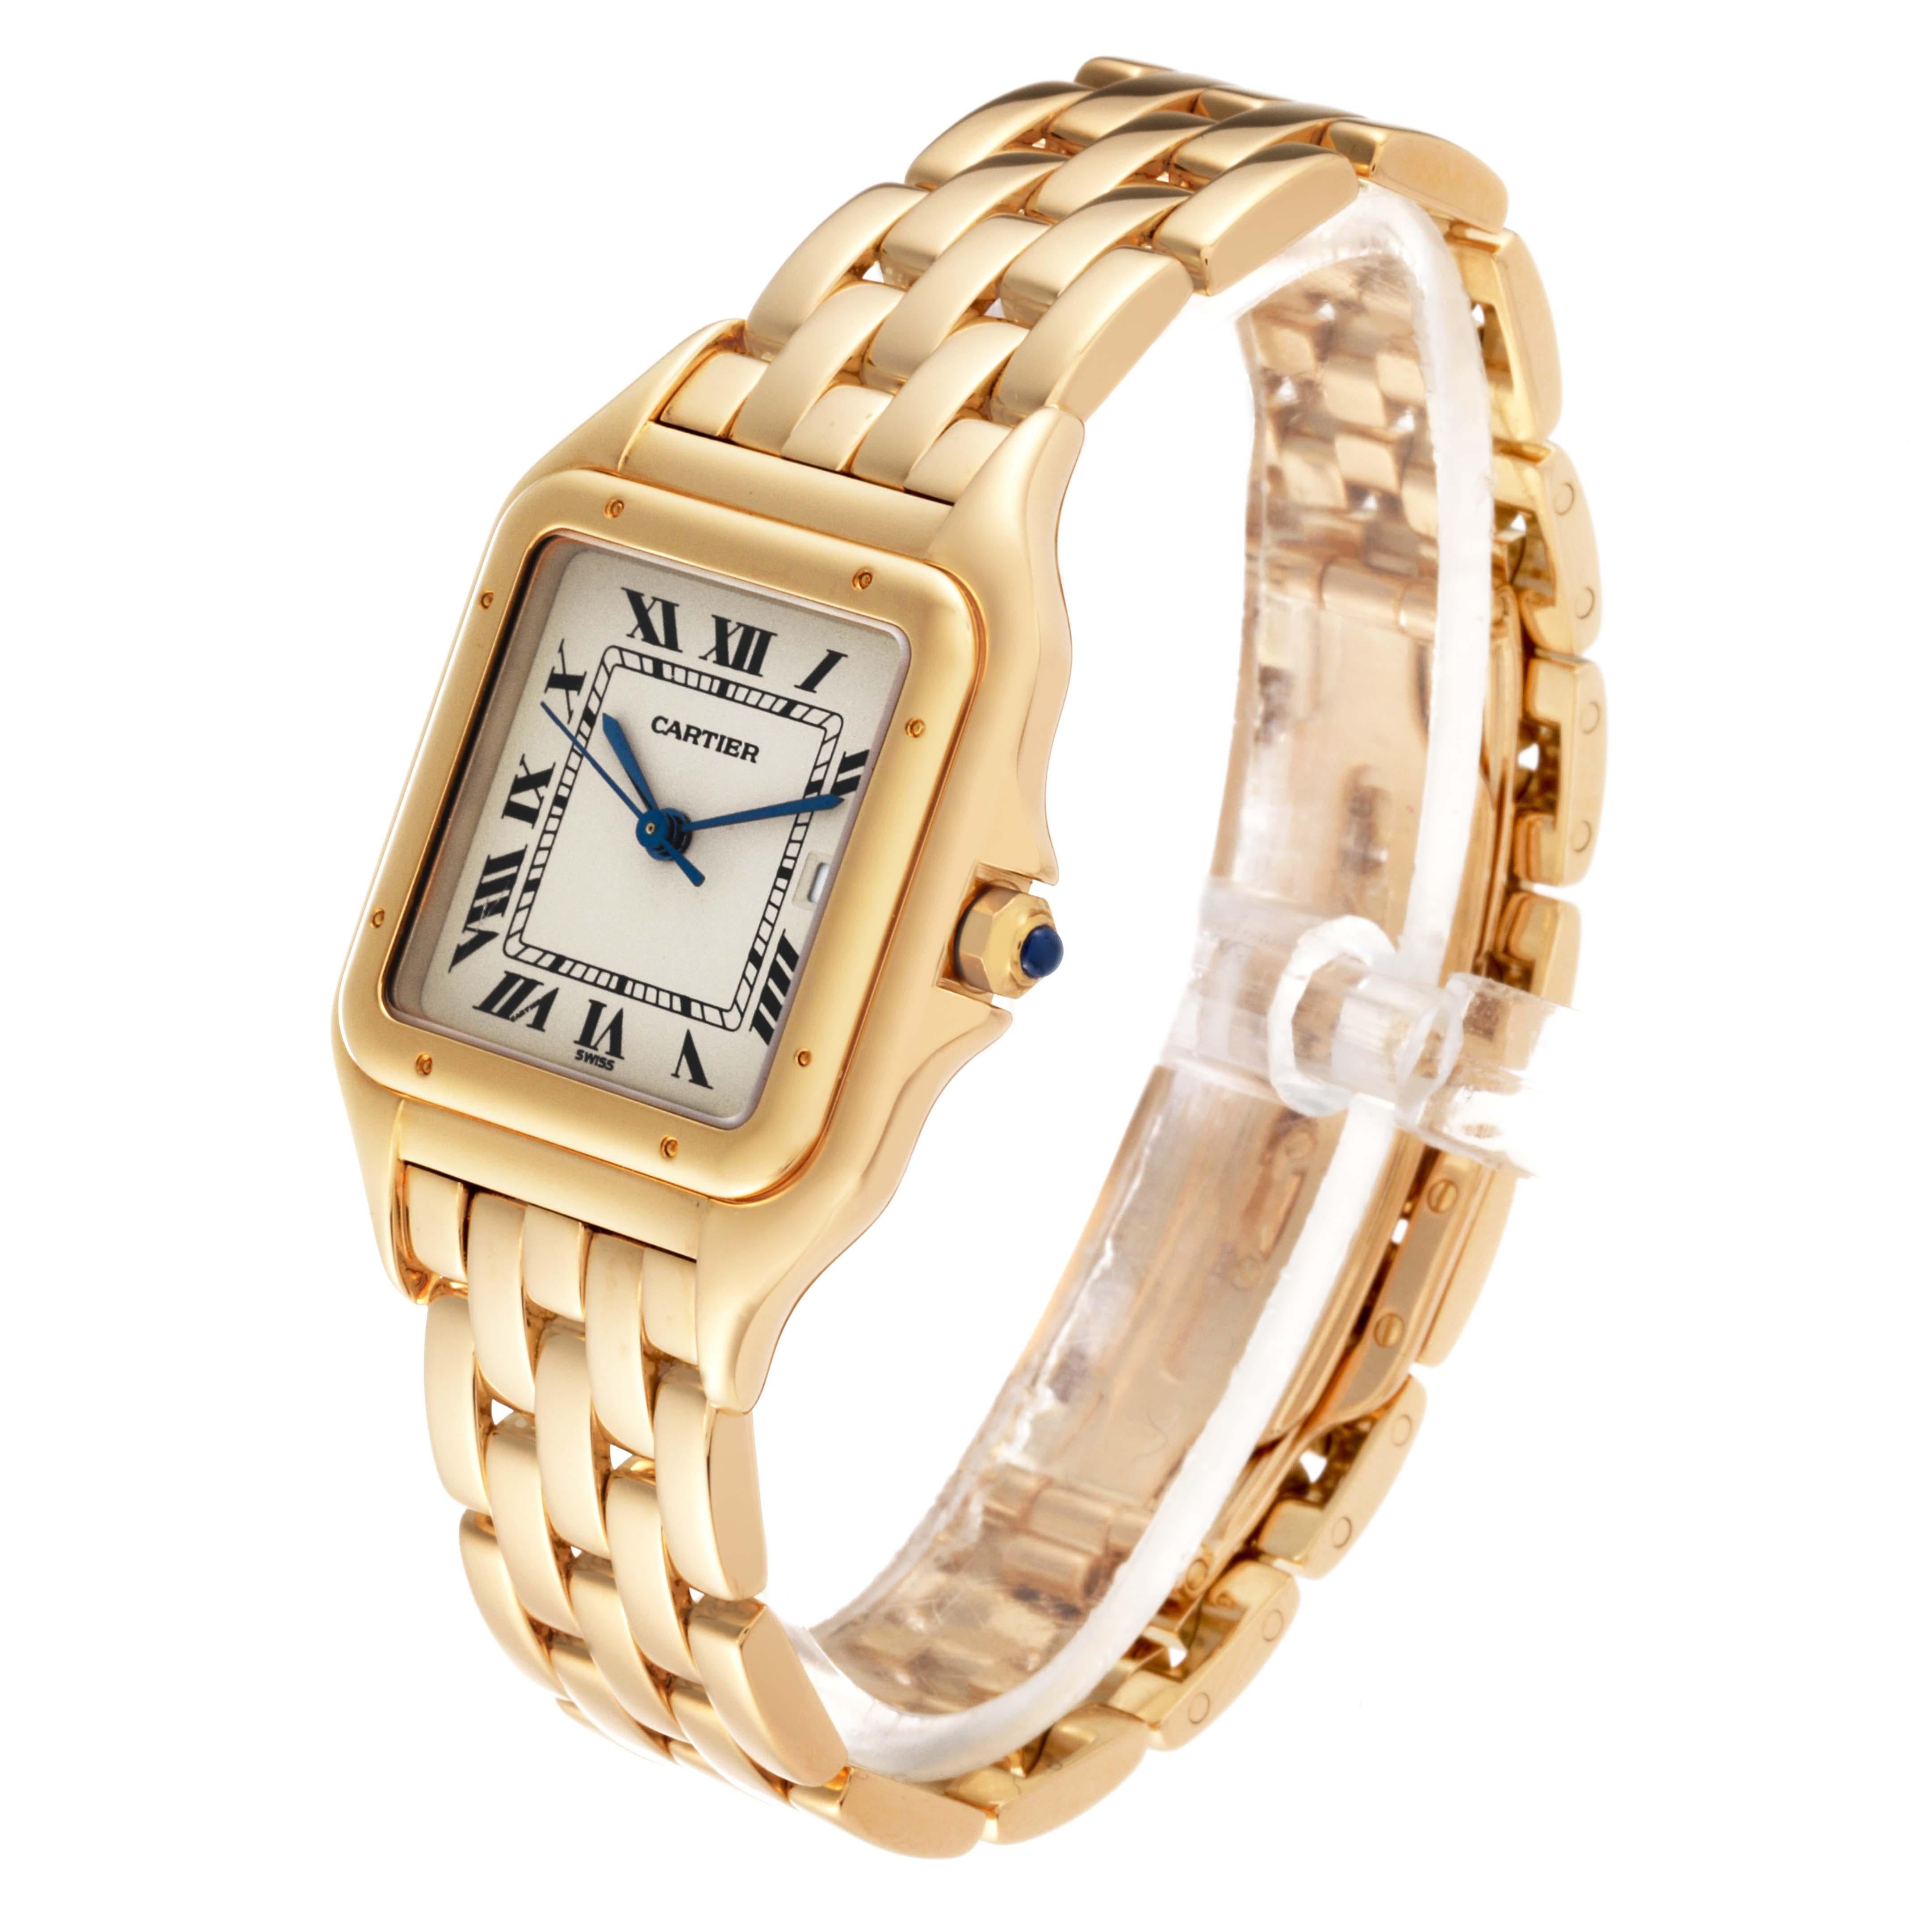 Cartier Panthere XL Yellow Gold Mens Watch W25014B9 For Sale 2